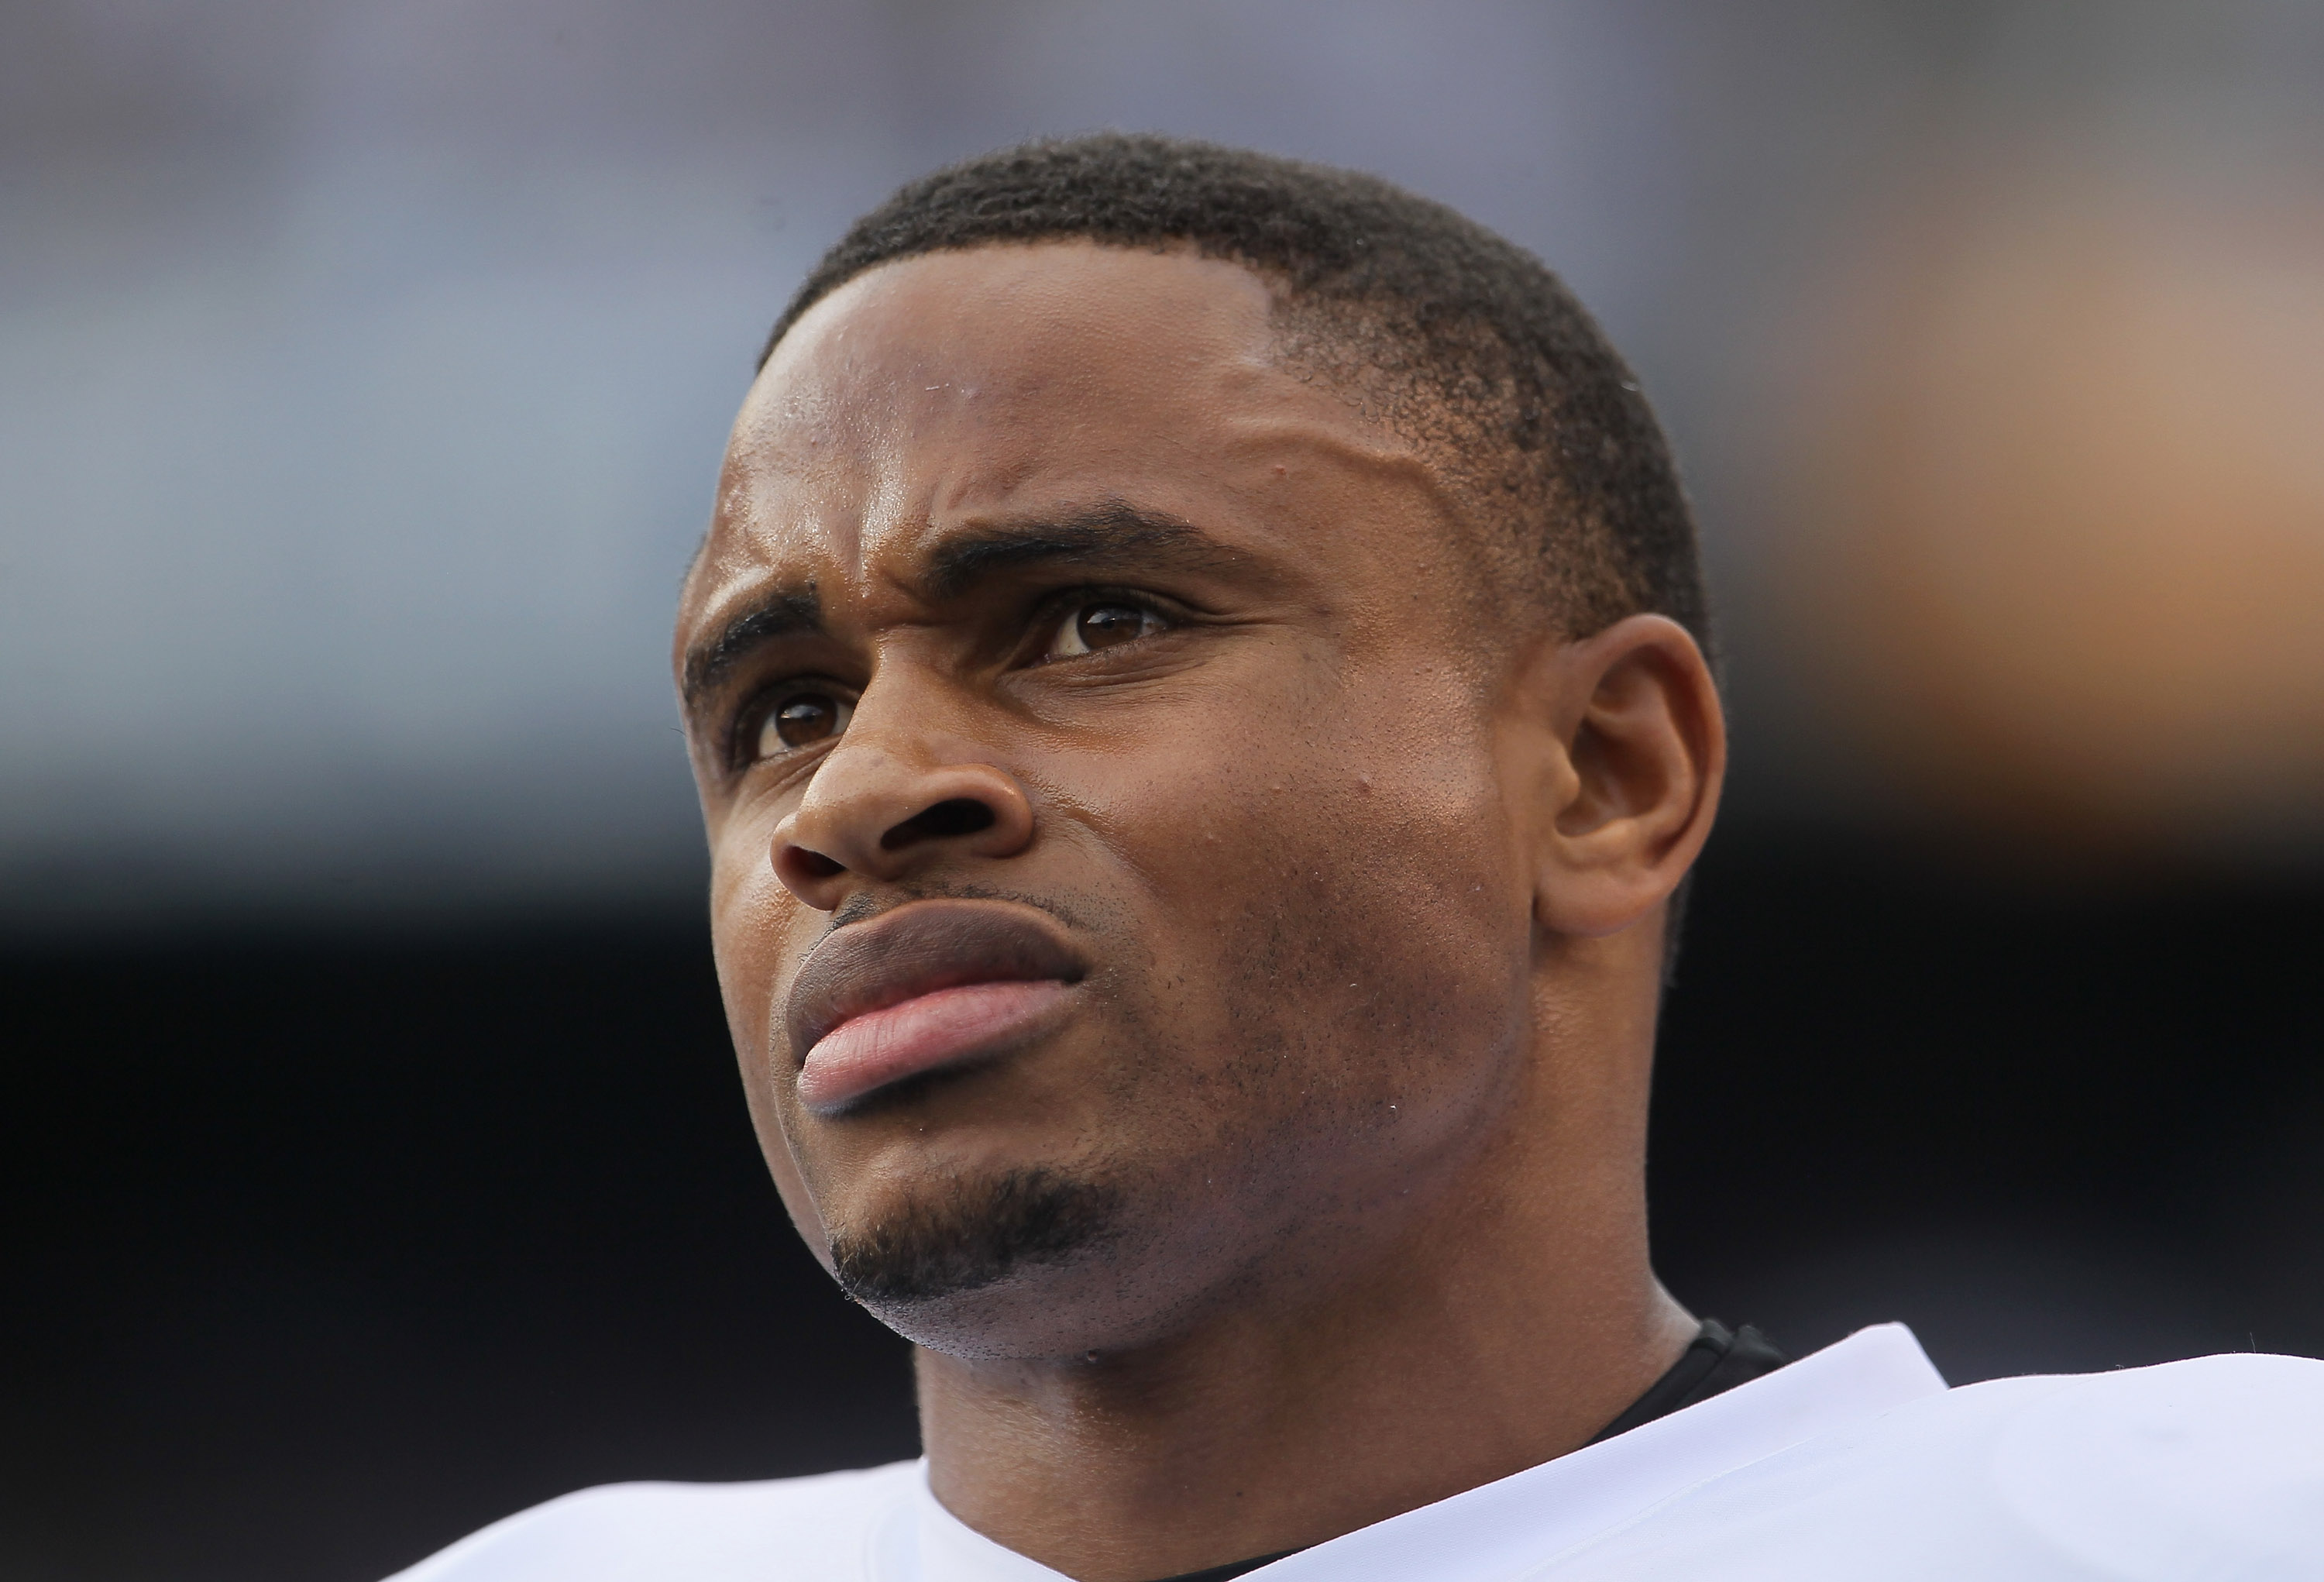 SAN DIEGO - DECEMBER 05:  Nnamdi Asomugha #21 the Oakland Raiders looks on from the sideline against the San Diego Chargers at Qualcomm Stadium on December 5, 2010 in San Diego, California. The Raiders defeated the Chargers 28-13.  (Photo by Jeff Gross/Ge